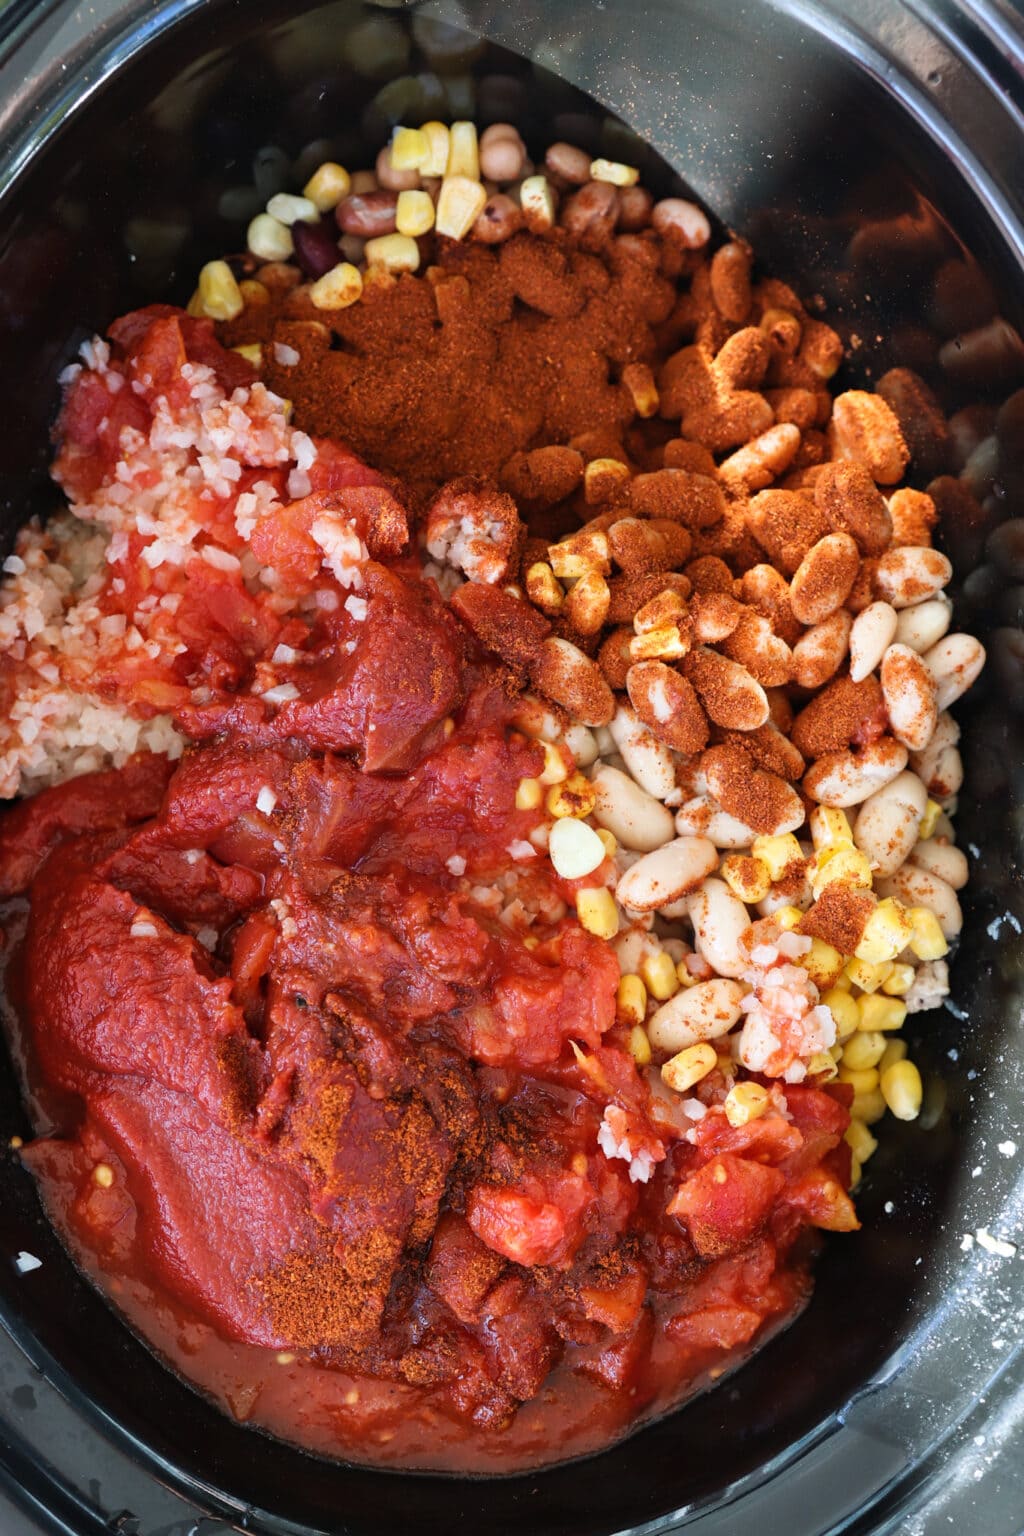 Ingredients in a slow cooker for a slow cooker sweet potato and turkey chili, including ground turkey, roasted sweet potatoes, onions, corn, garlic, mushrooms, tomatoes and cauliflower rice.